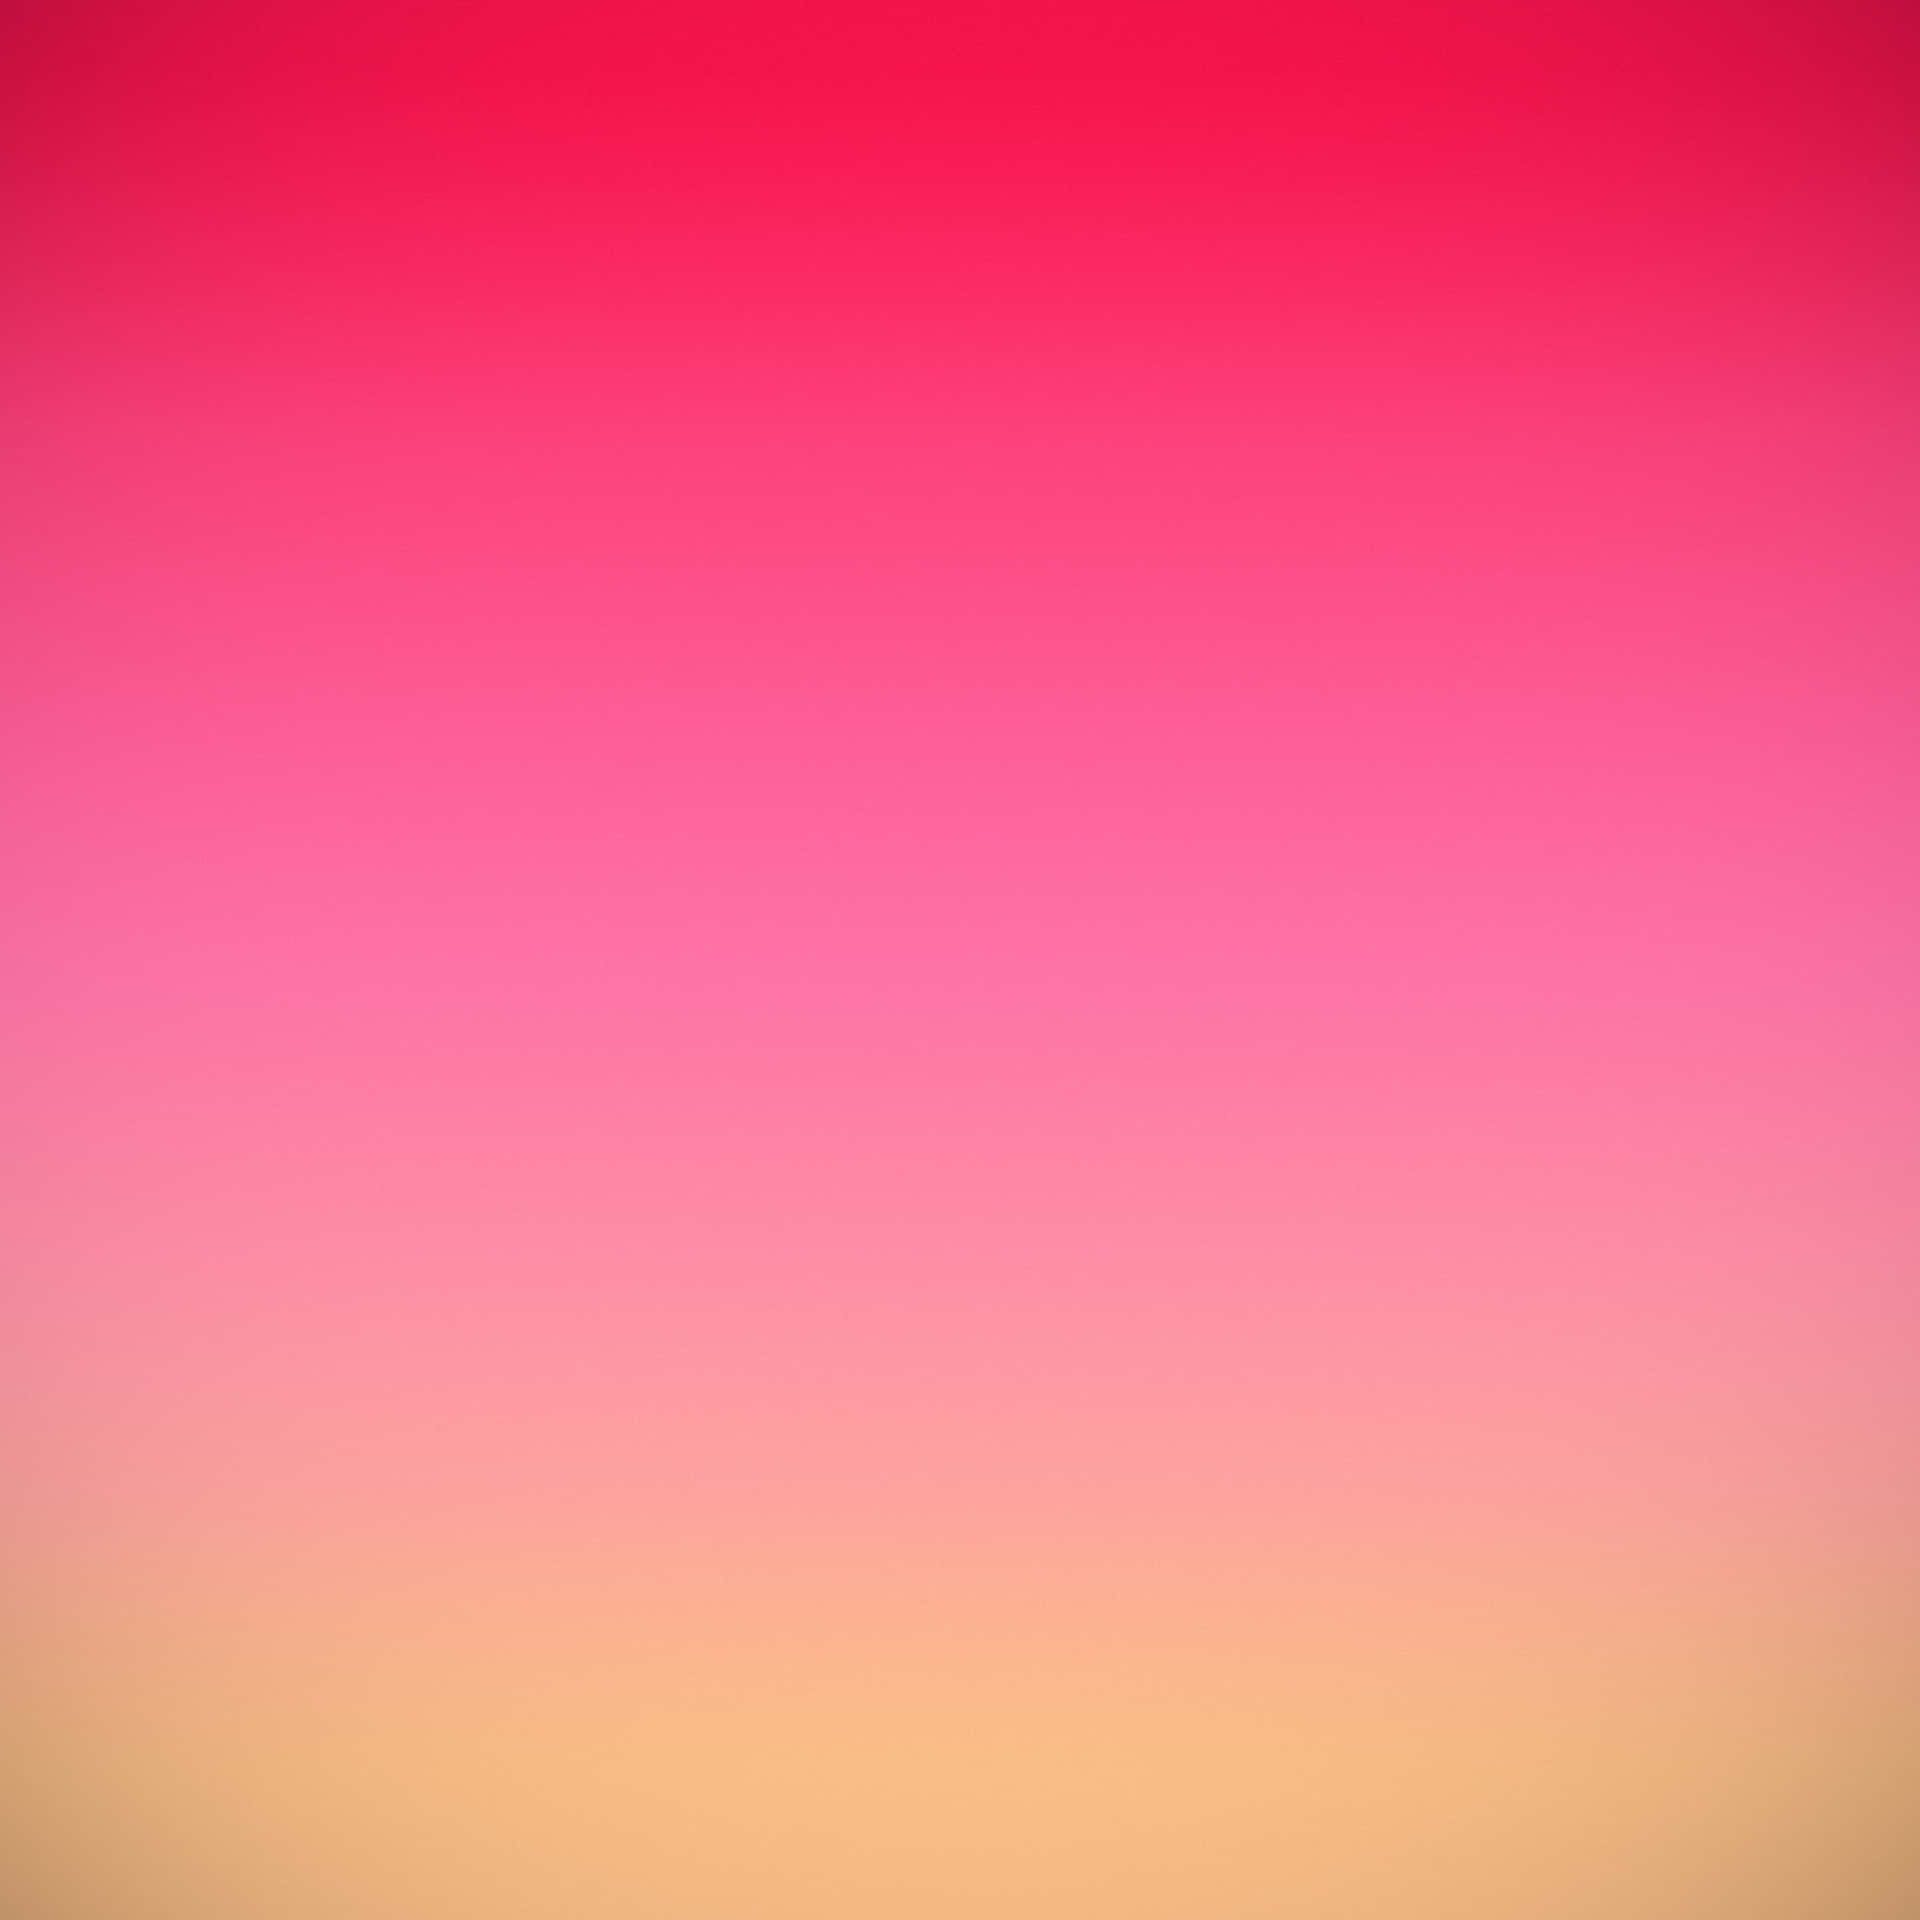 A Pink And Yellow Gradient Background